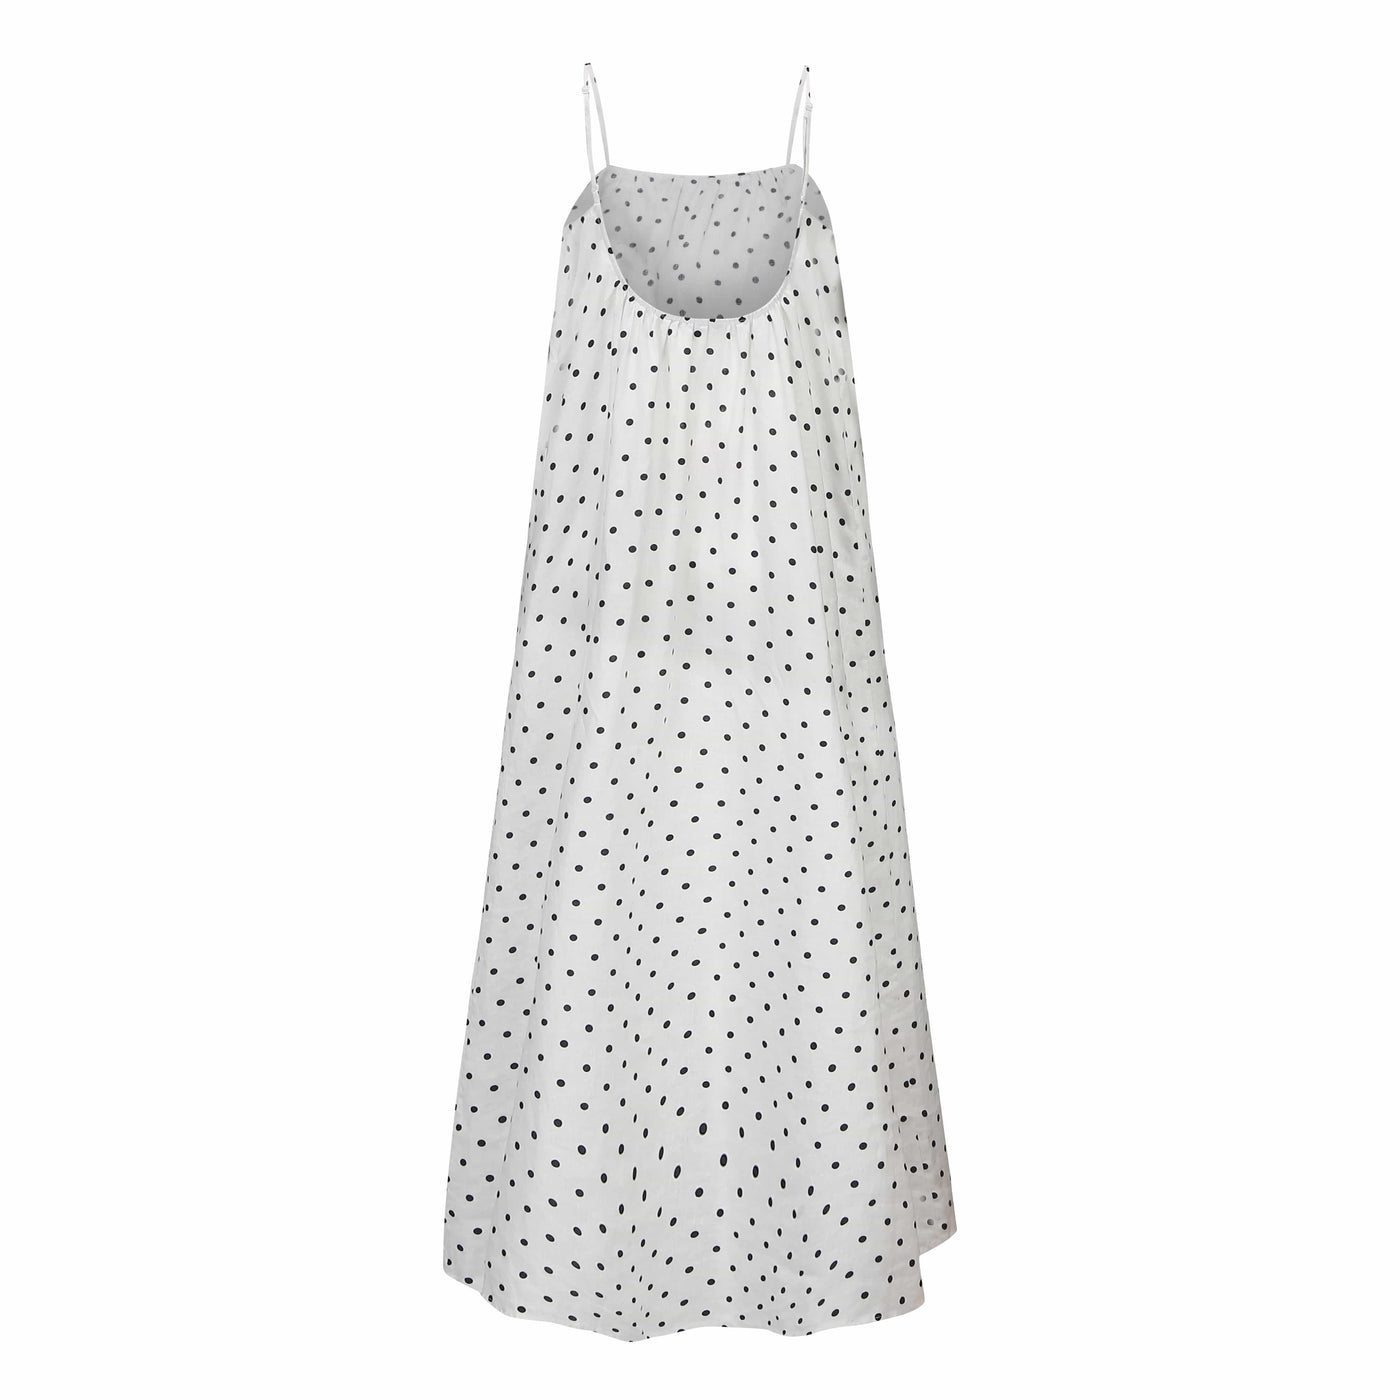 Lilly Pilly Collection 100% organic linen Olive Dress in Polka Dot as 3D image showing back view